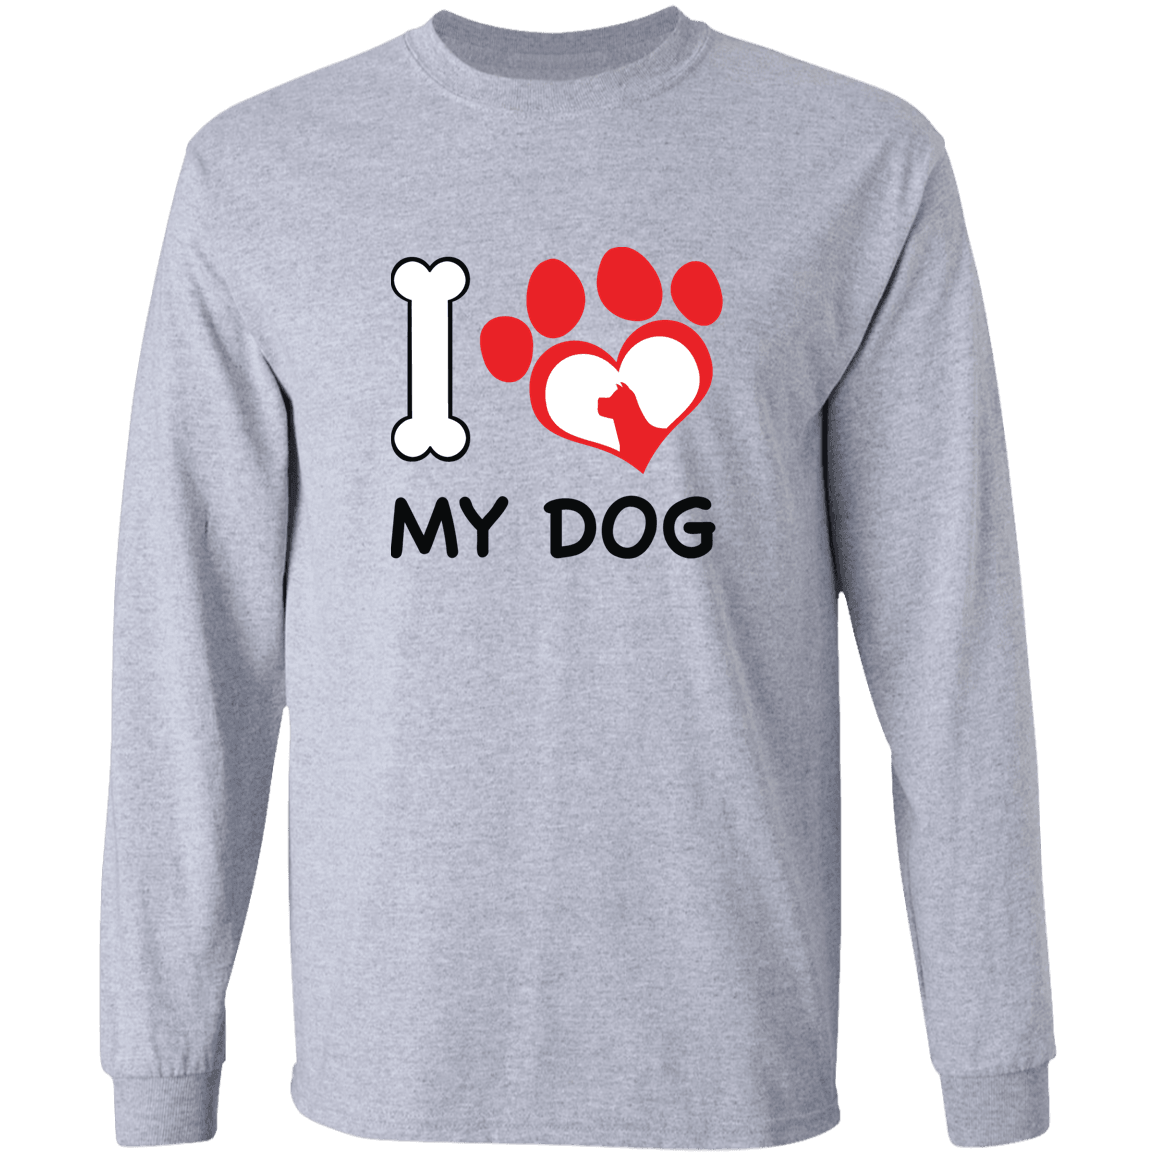 Designs by MyUtopia Shout Out:I Love My Dog Long Sleeve Ultra Cotton Unisex T-Shirt,Sport Grey / S,Long Sleeve T-Shirts